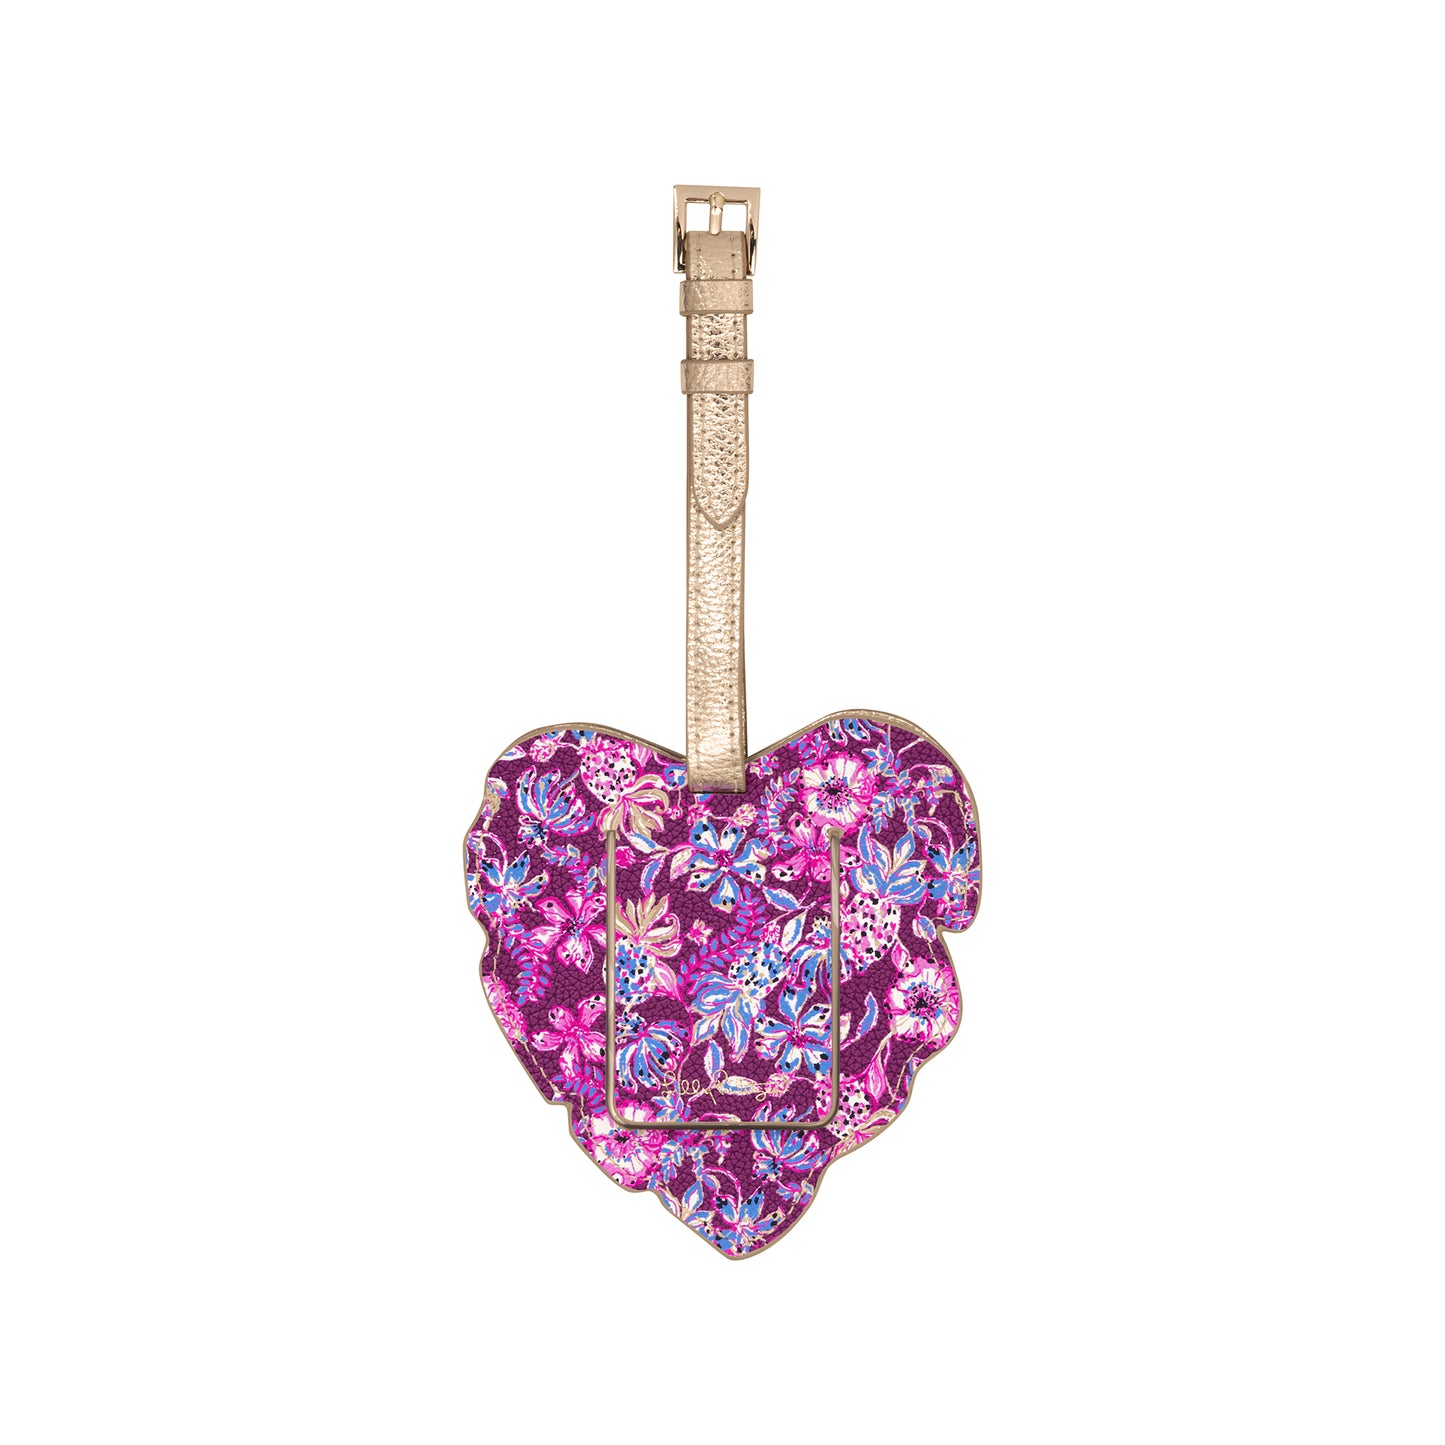 Shaped Luggage Tag, Amarena Cherry Tropical with a Twist